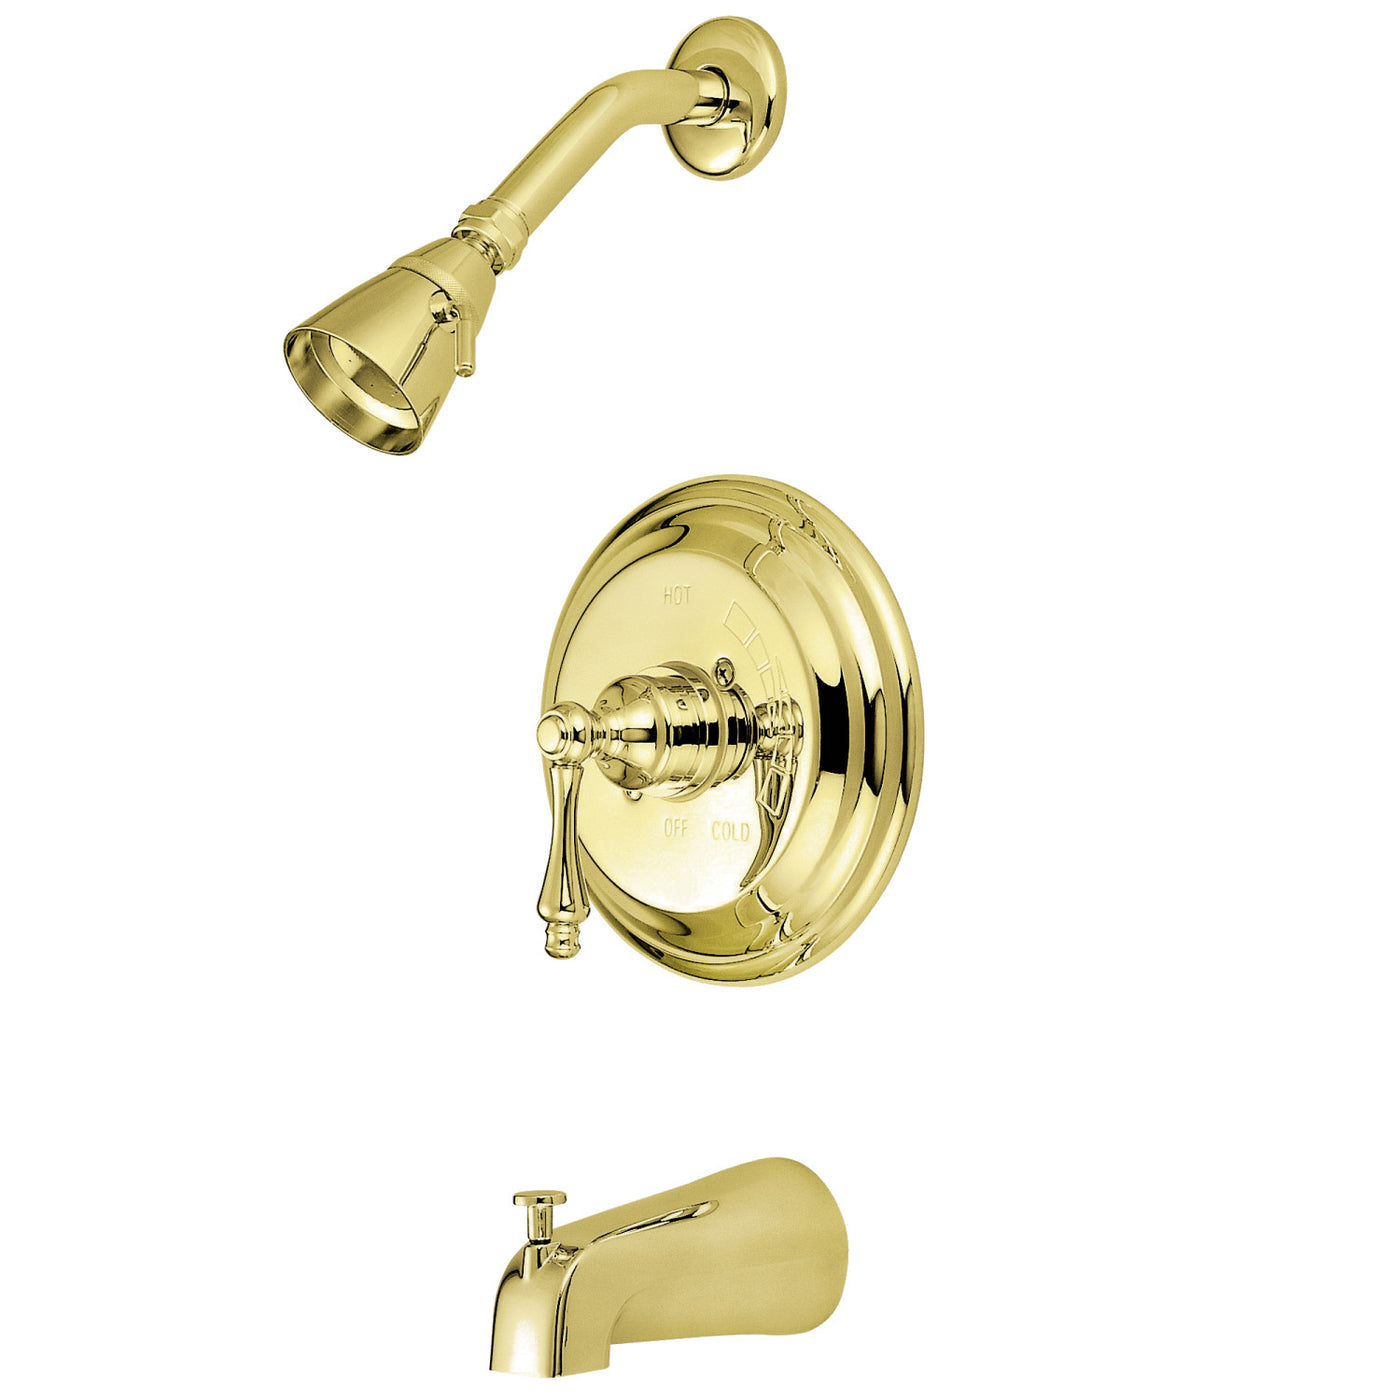 Elements of Design EB3632AL Tub and Shower Faucet, Polished Brass